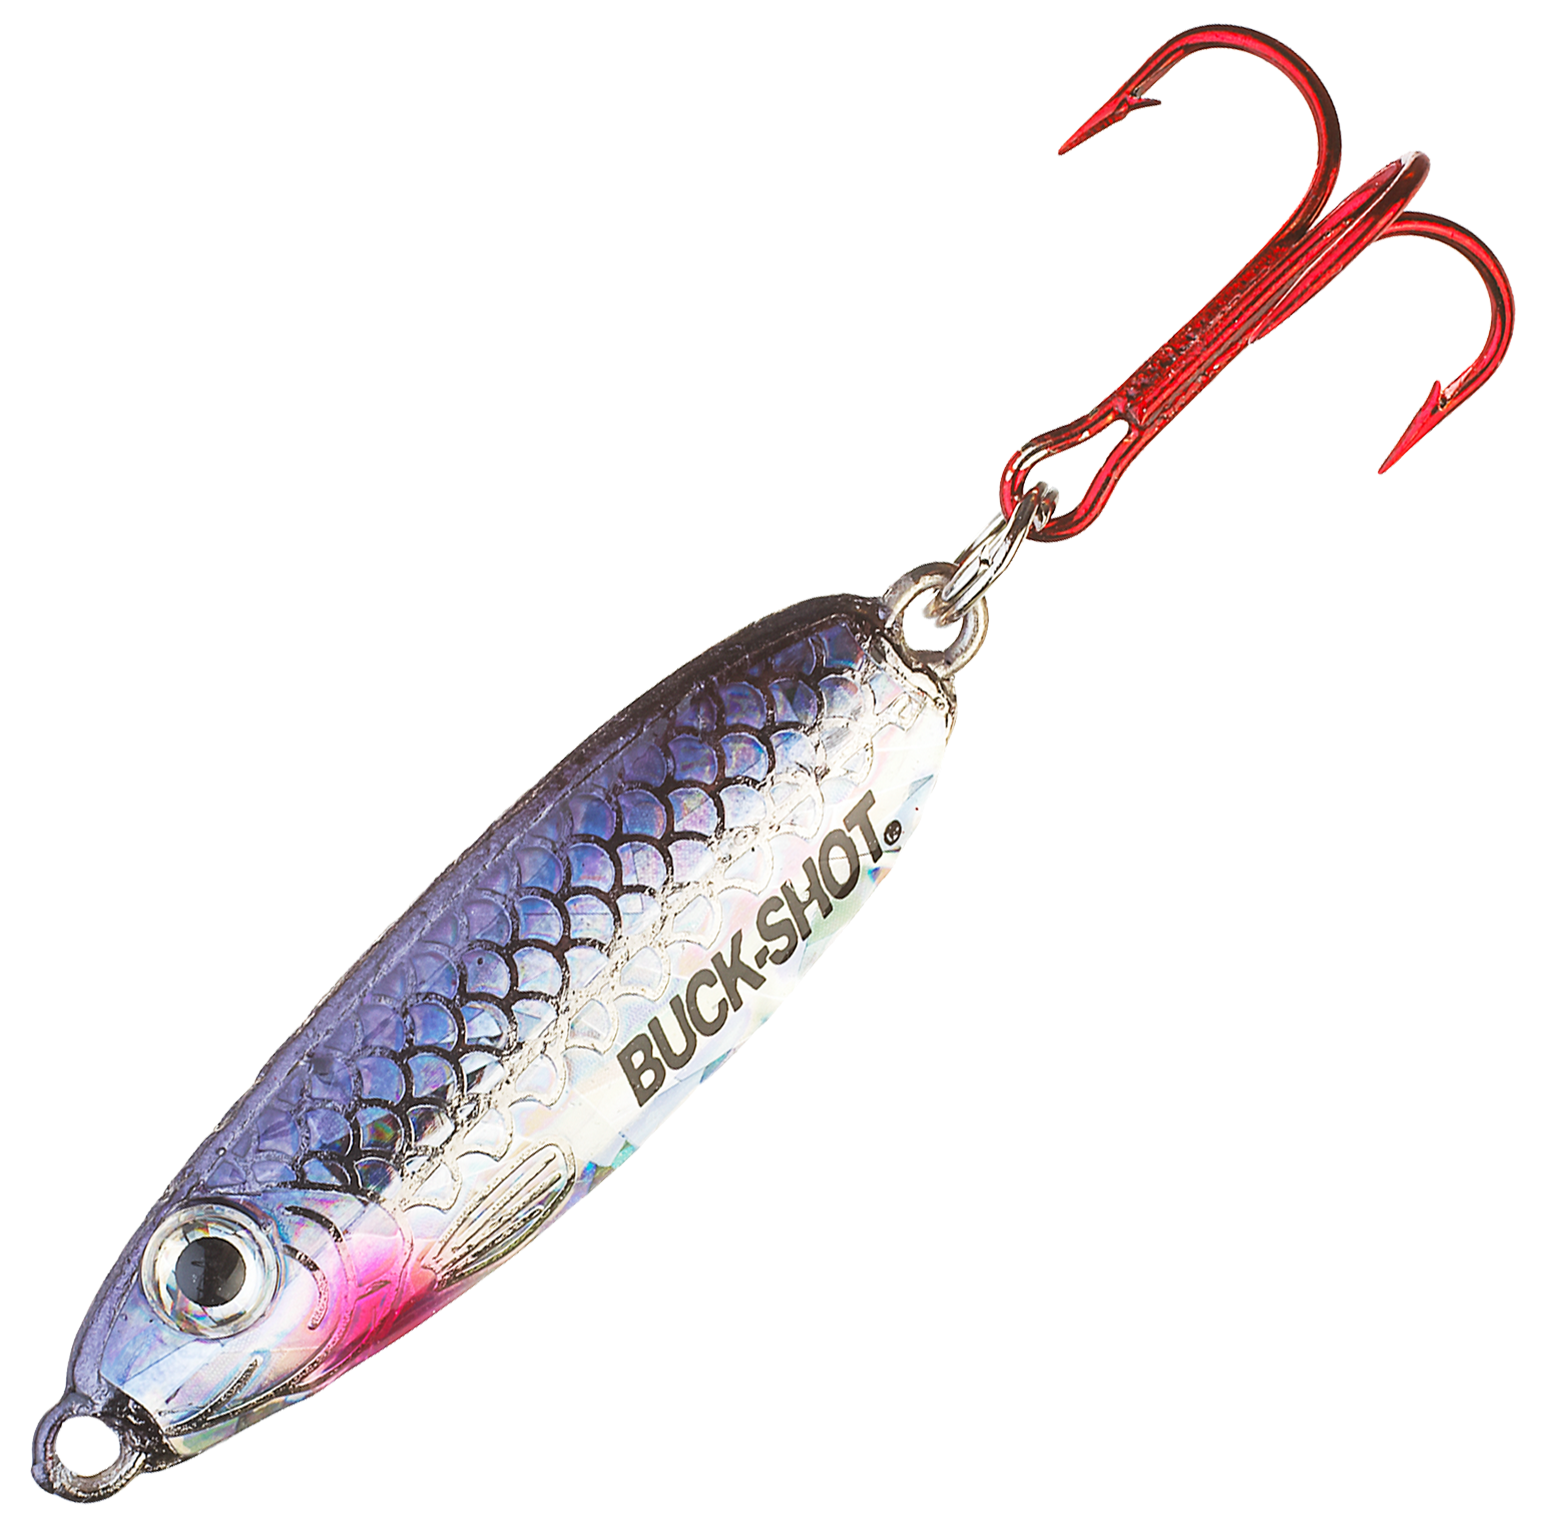 Northland Tackle Buck Shot Rattle Spoon, Freshwater, Super-Glo